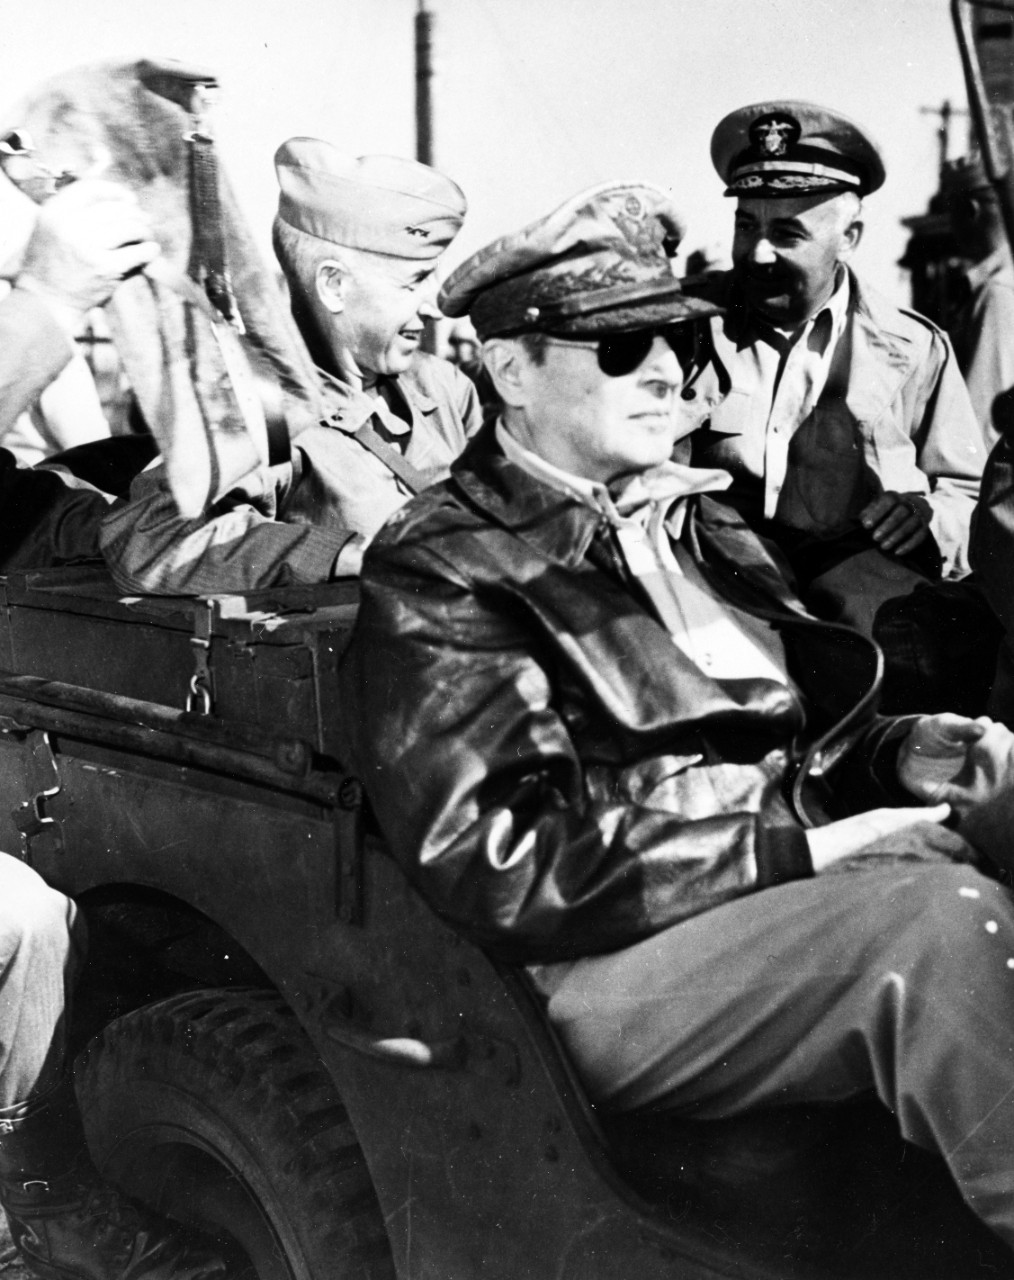 Photo #: 80-G-421945  General of the Army Douglas MacArthur, Commander in Chief, Far East Command  